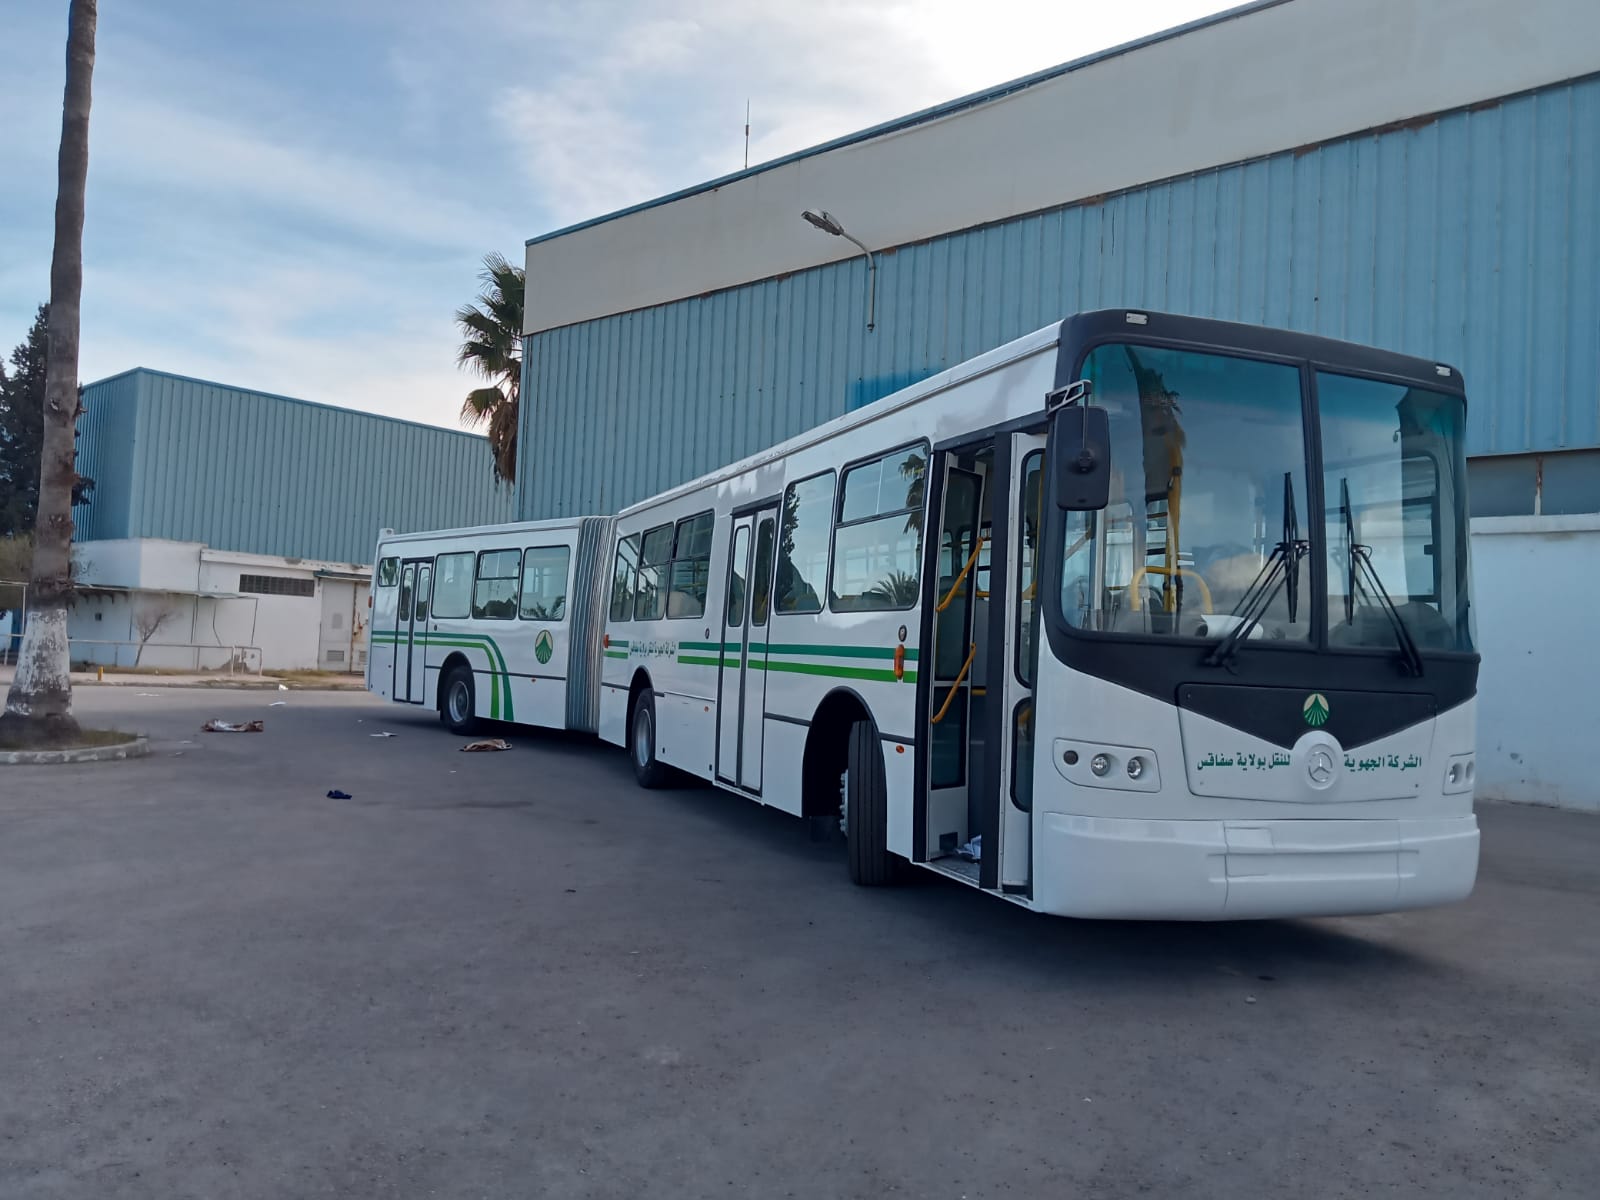 Delivery of 10 articulated buses to the Sfax regional transport company